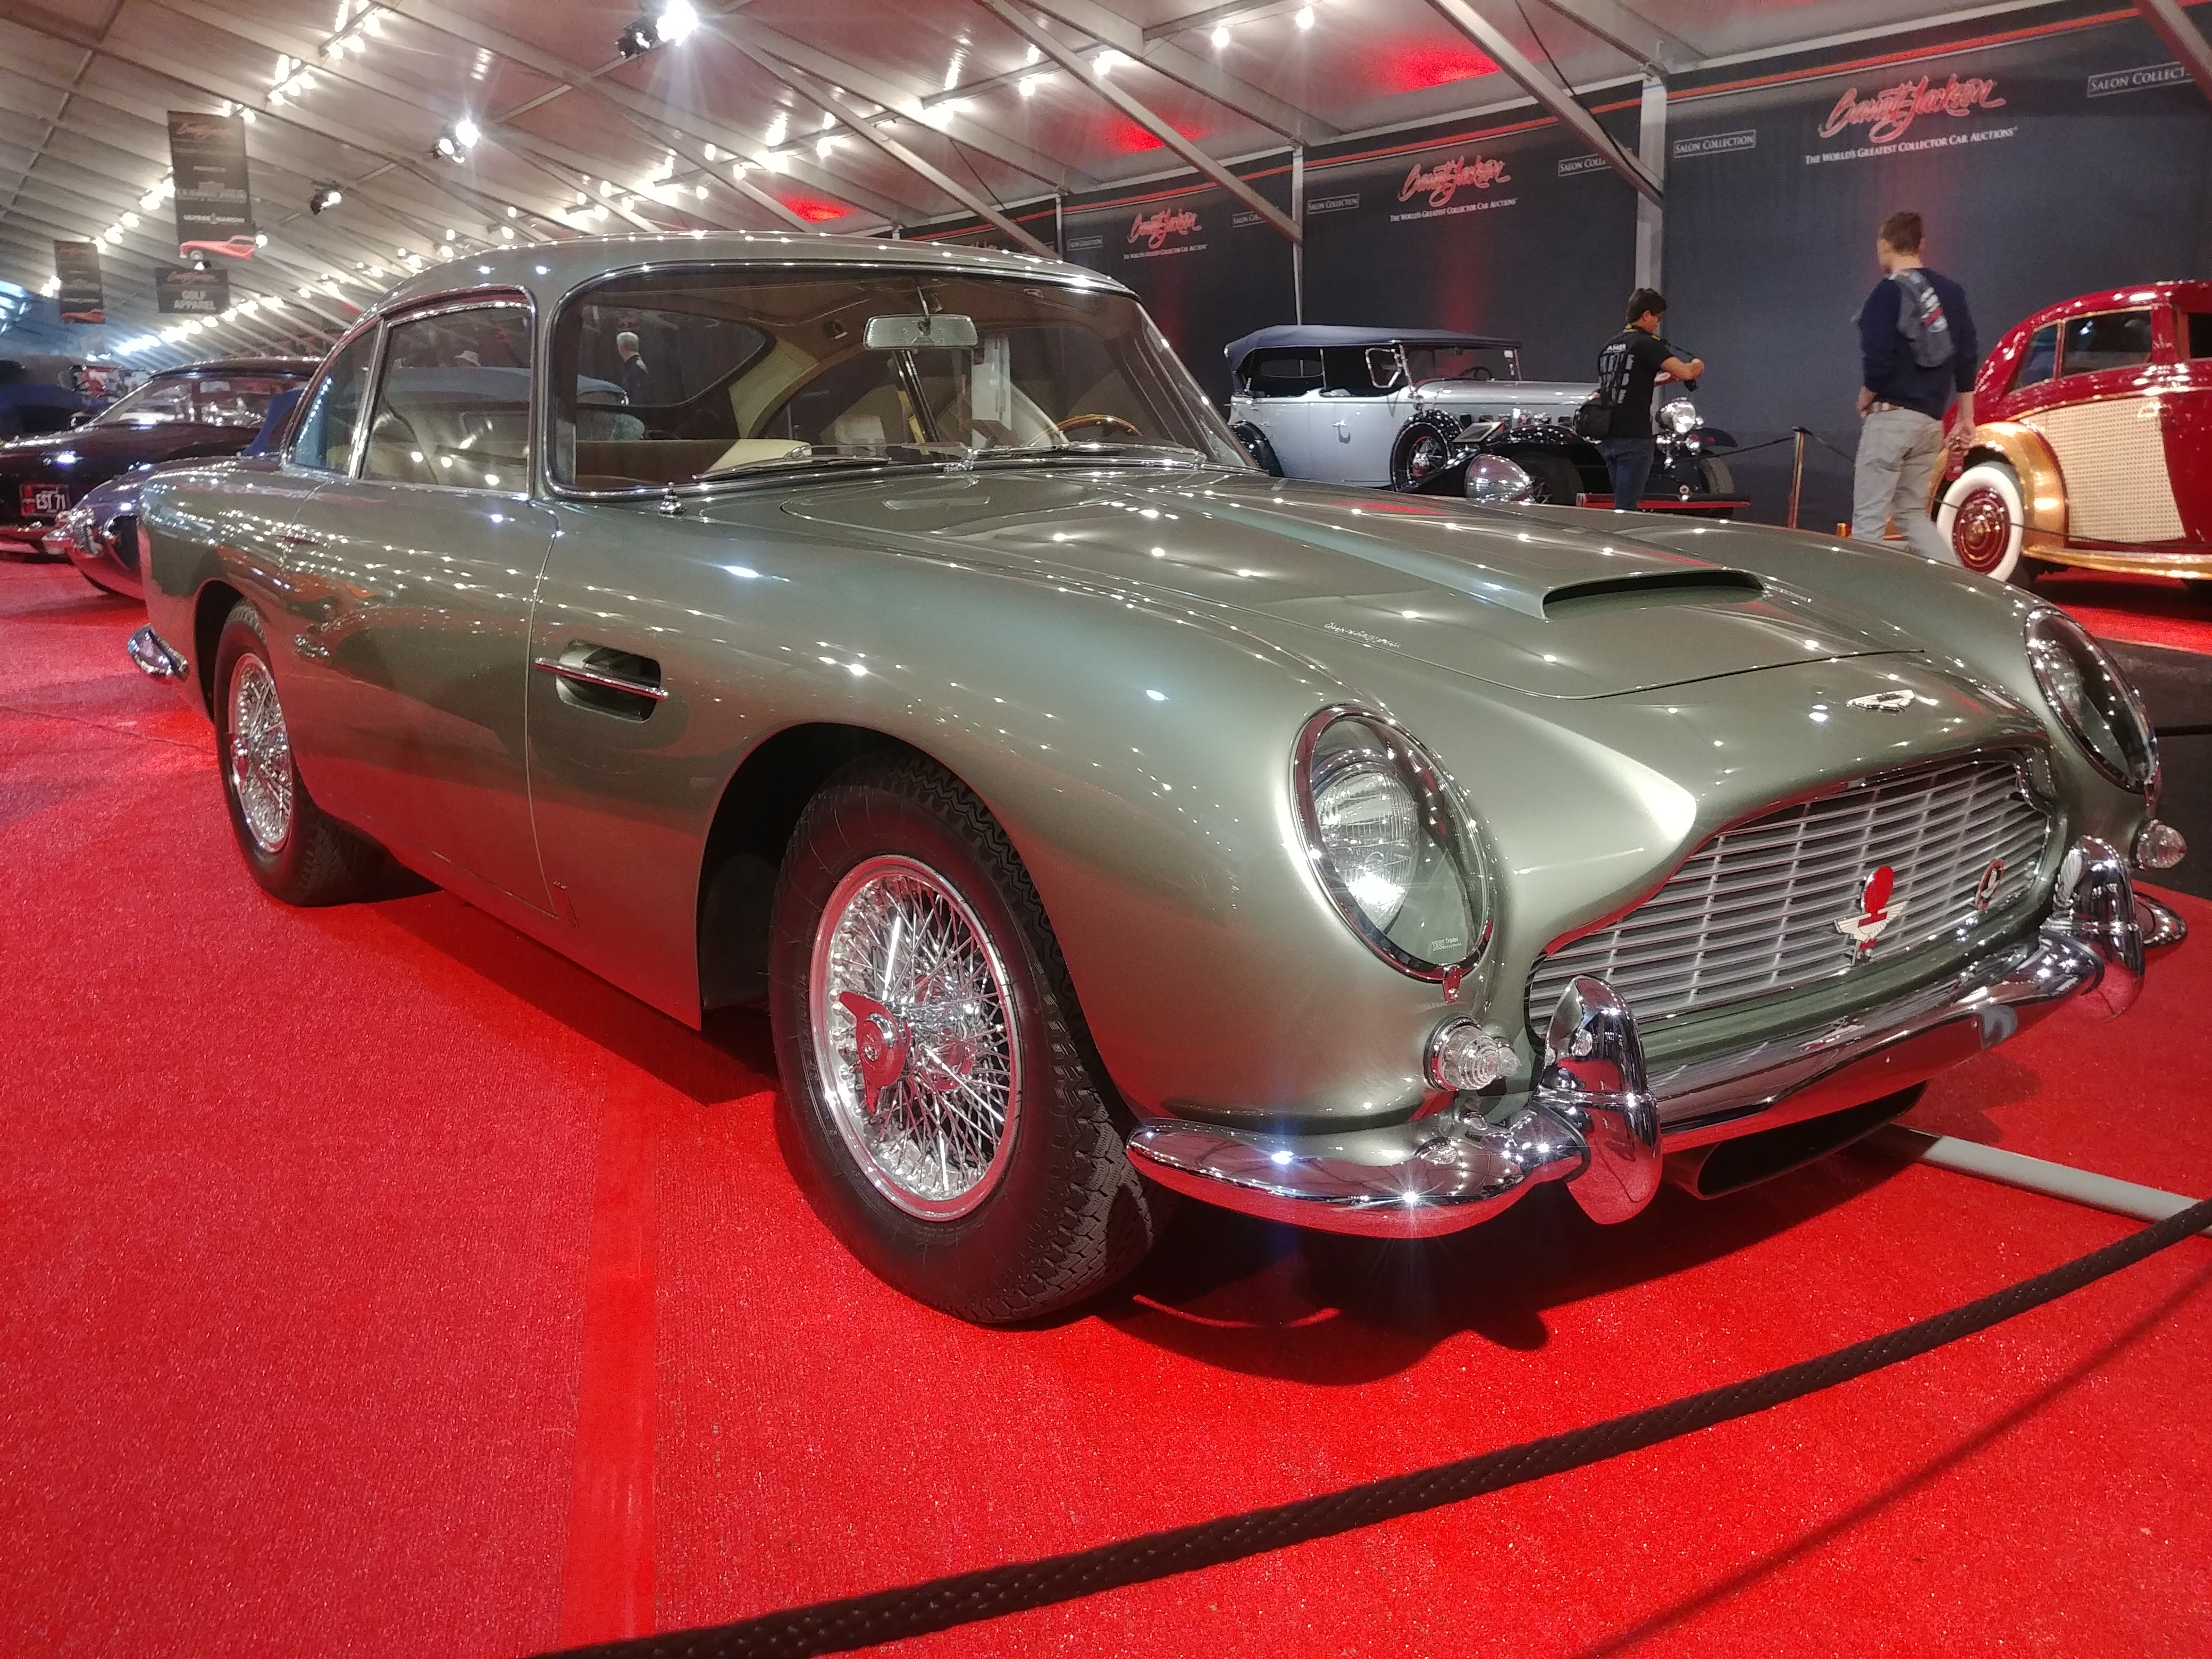 , Andy selects his favorites at Barrett-Jackson’s Scottsdale sale, ClassicCars.com Journal